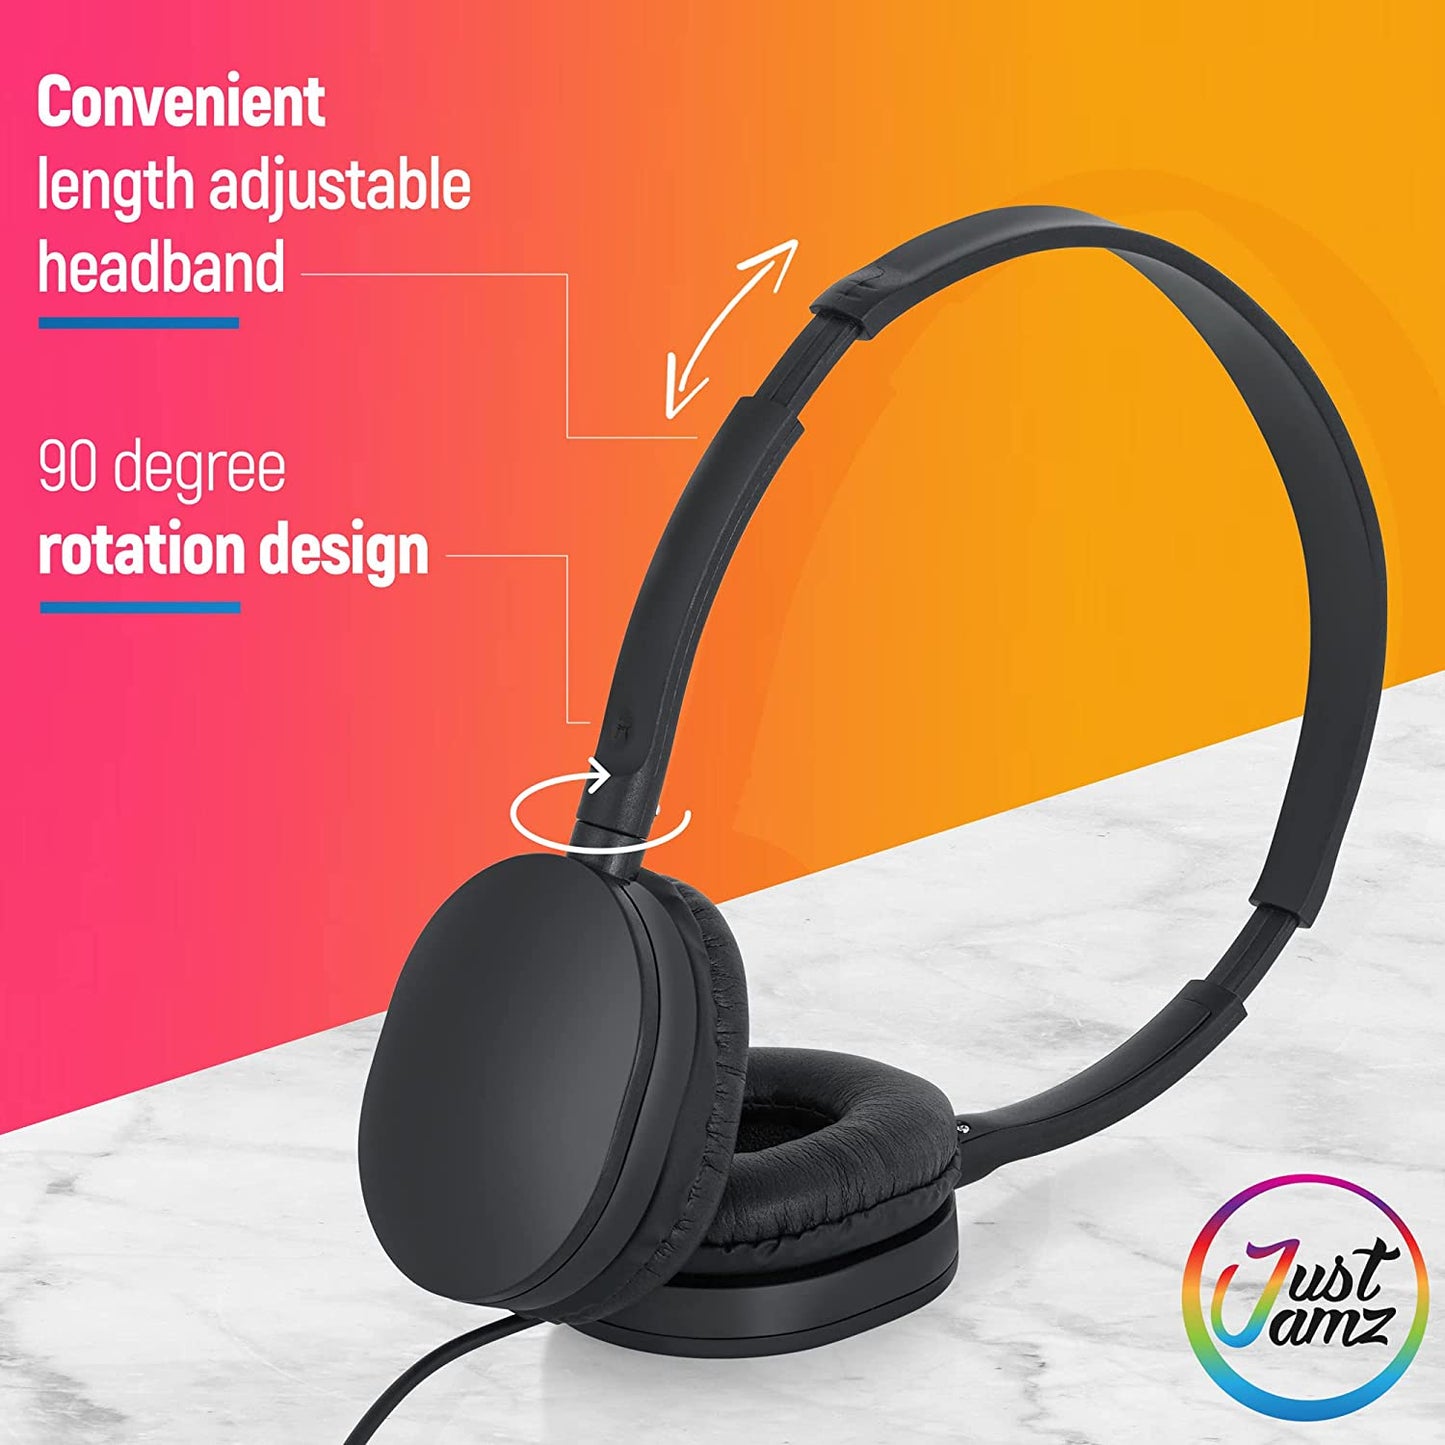 JustJamz® Headphones | 10 Pack | Wholesale Bulk Headphones | Headphones with Microphone | Bulk Over-Ear Headphones with Mic | Foldable with Soft Leather Cushion | HQ Stereo Sound 3.5mm Jack (Black)